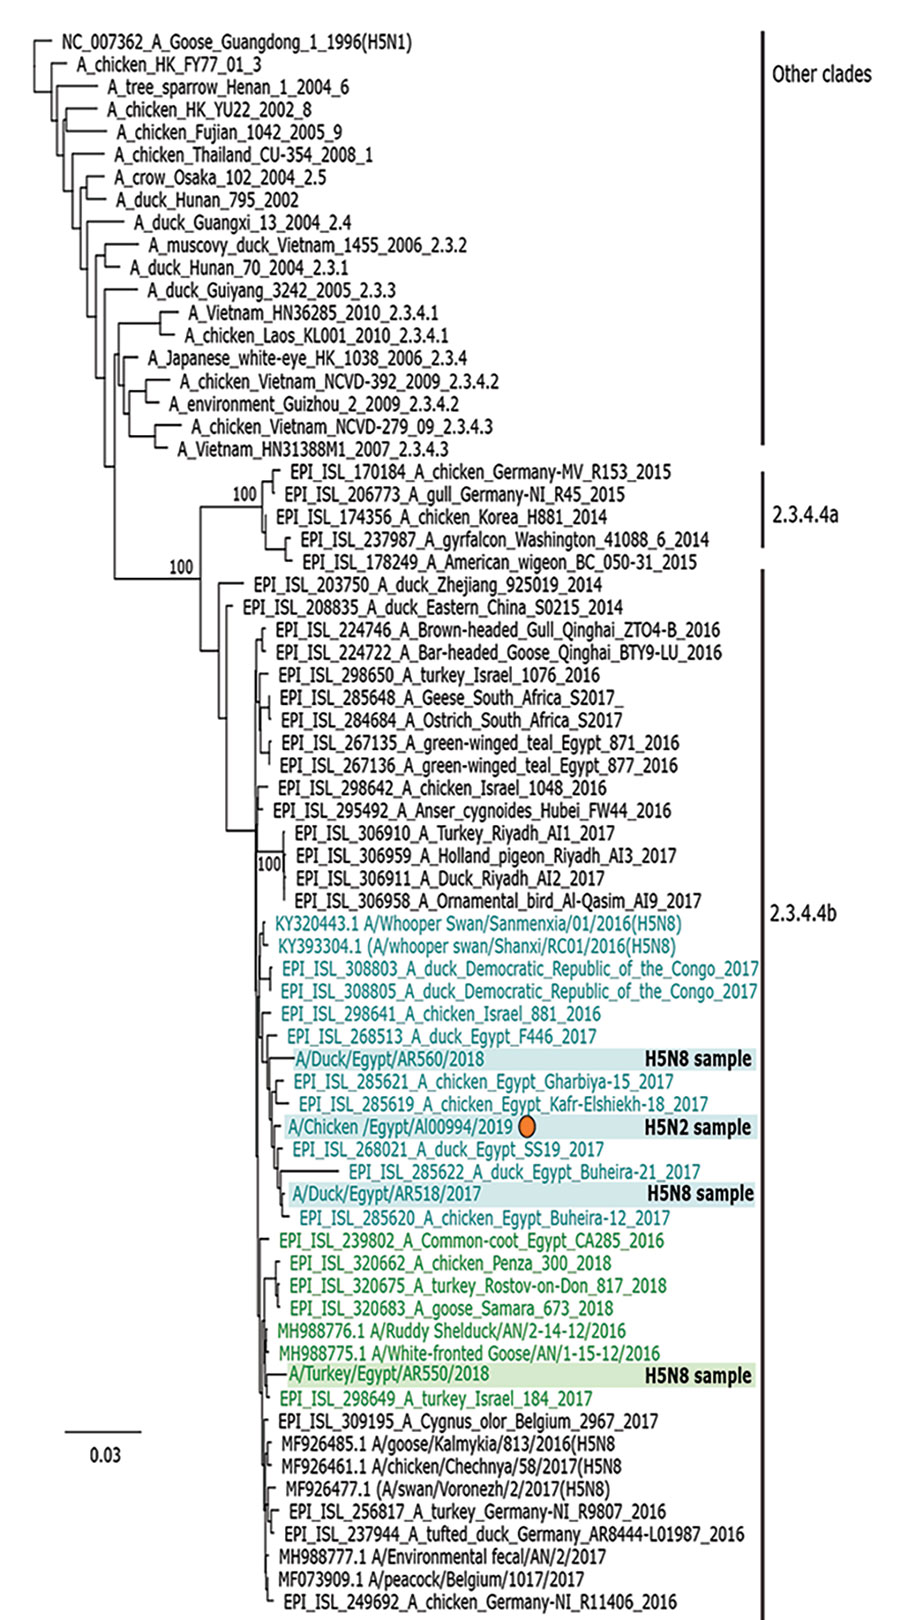 Phylogenetic analysis of the hemagglutinin segments of reassortant highly pathogenic avian influenza H5N2 and H5N8 viruses belonging to clade 2.3.3.4b from Egypt and reference viruses. Sequence analysis was based on alignment analyses by MAFFT version 7.450 embedded in the Geneious software suite, version 11.1.7 (https://www.geneious.com) with manual editing. We performed maximum-likelihood calculations using PhyML version 3.0 (http://www.atgc-montpellier.fr/phyml); we chose the best-fit model a